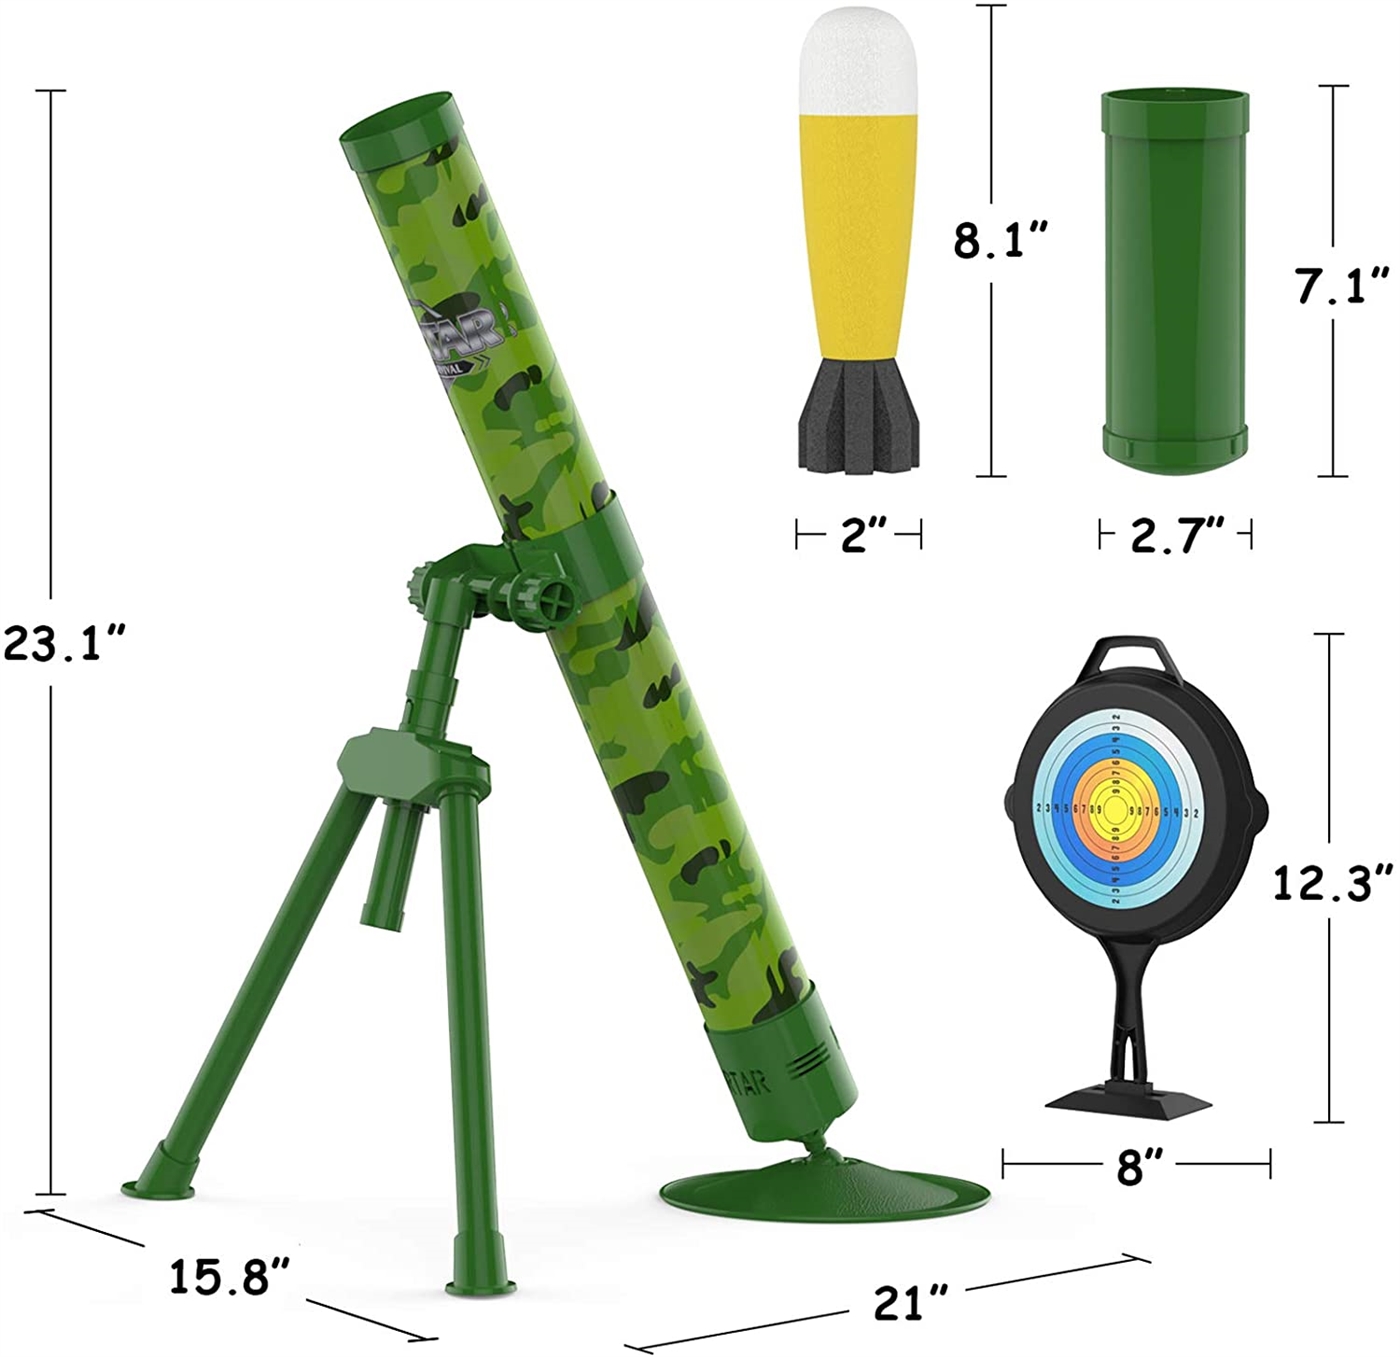 Mortar toy size.